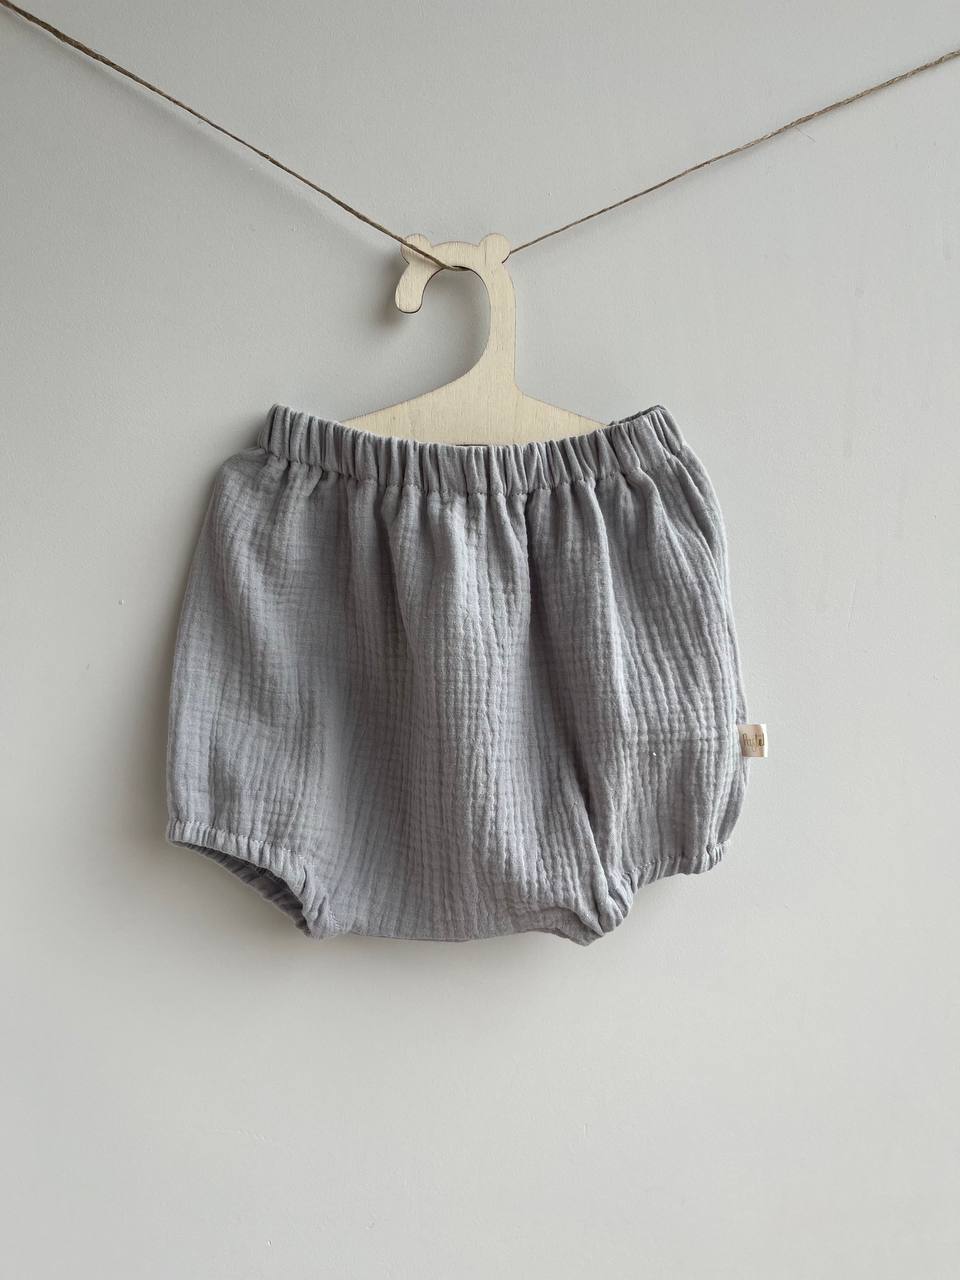 Muslin baby bloomers Unisex, diaper cover